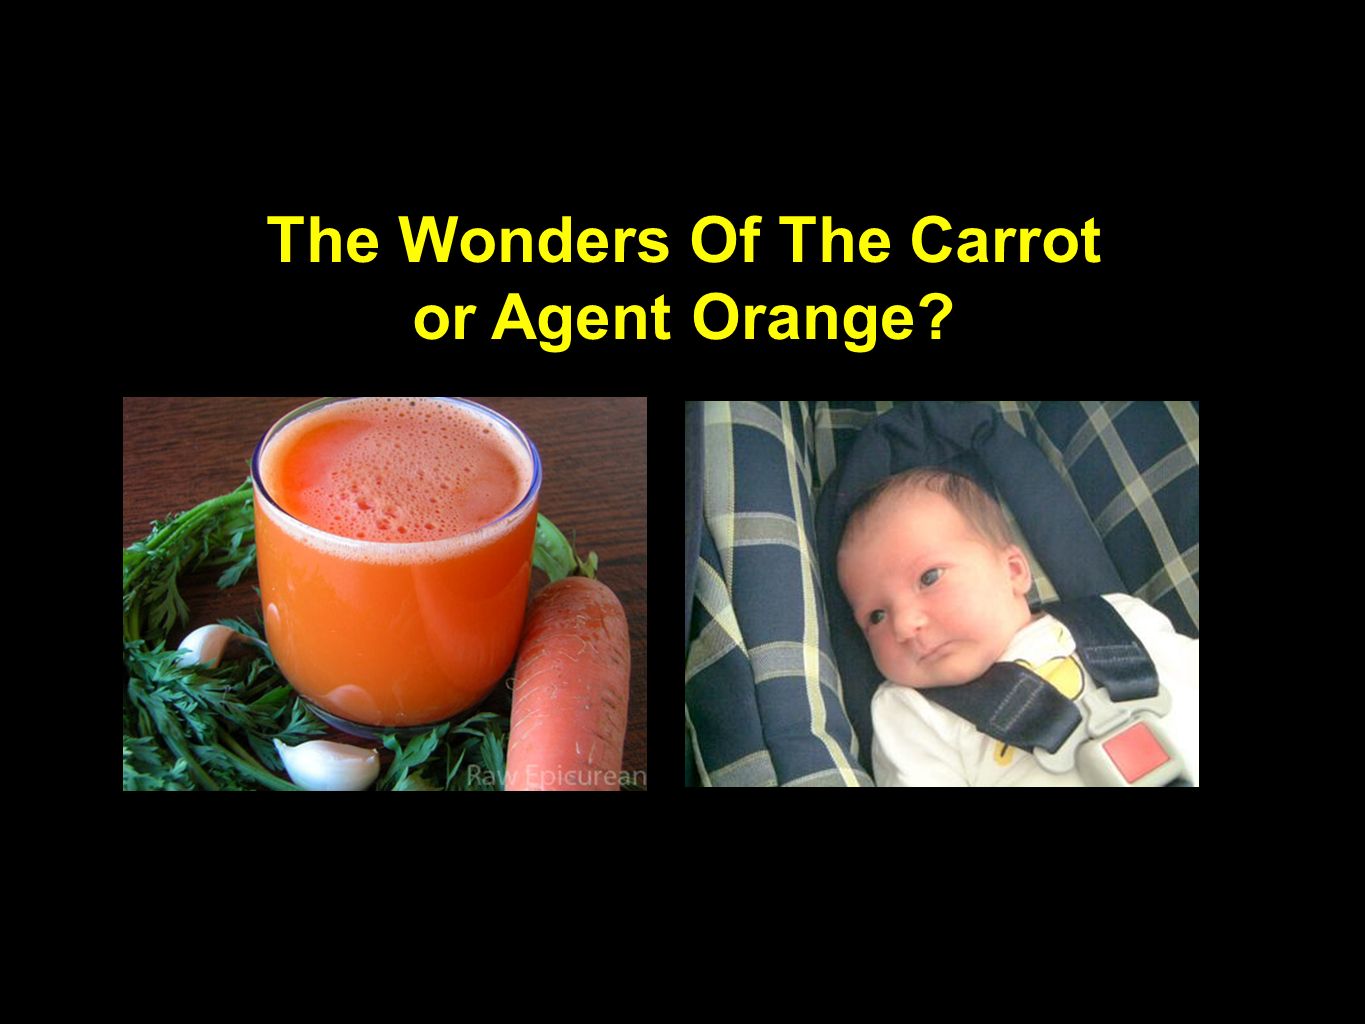 The Wonders Of The Carrot or Agent Orange